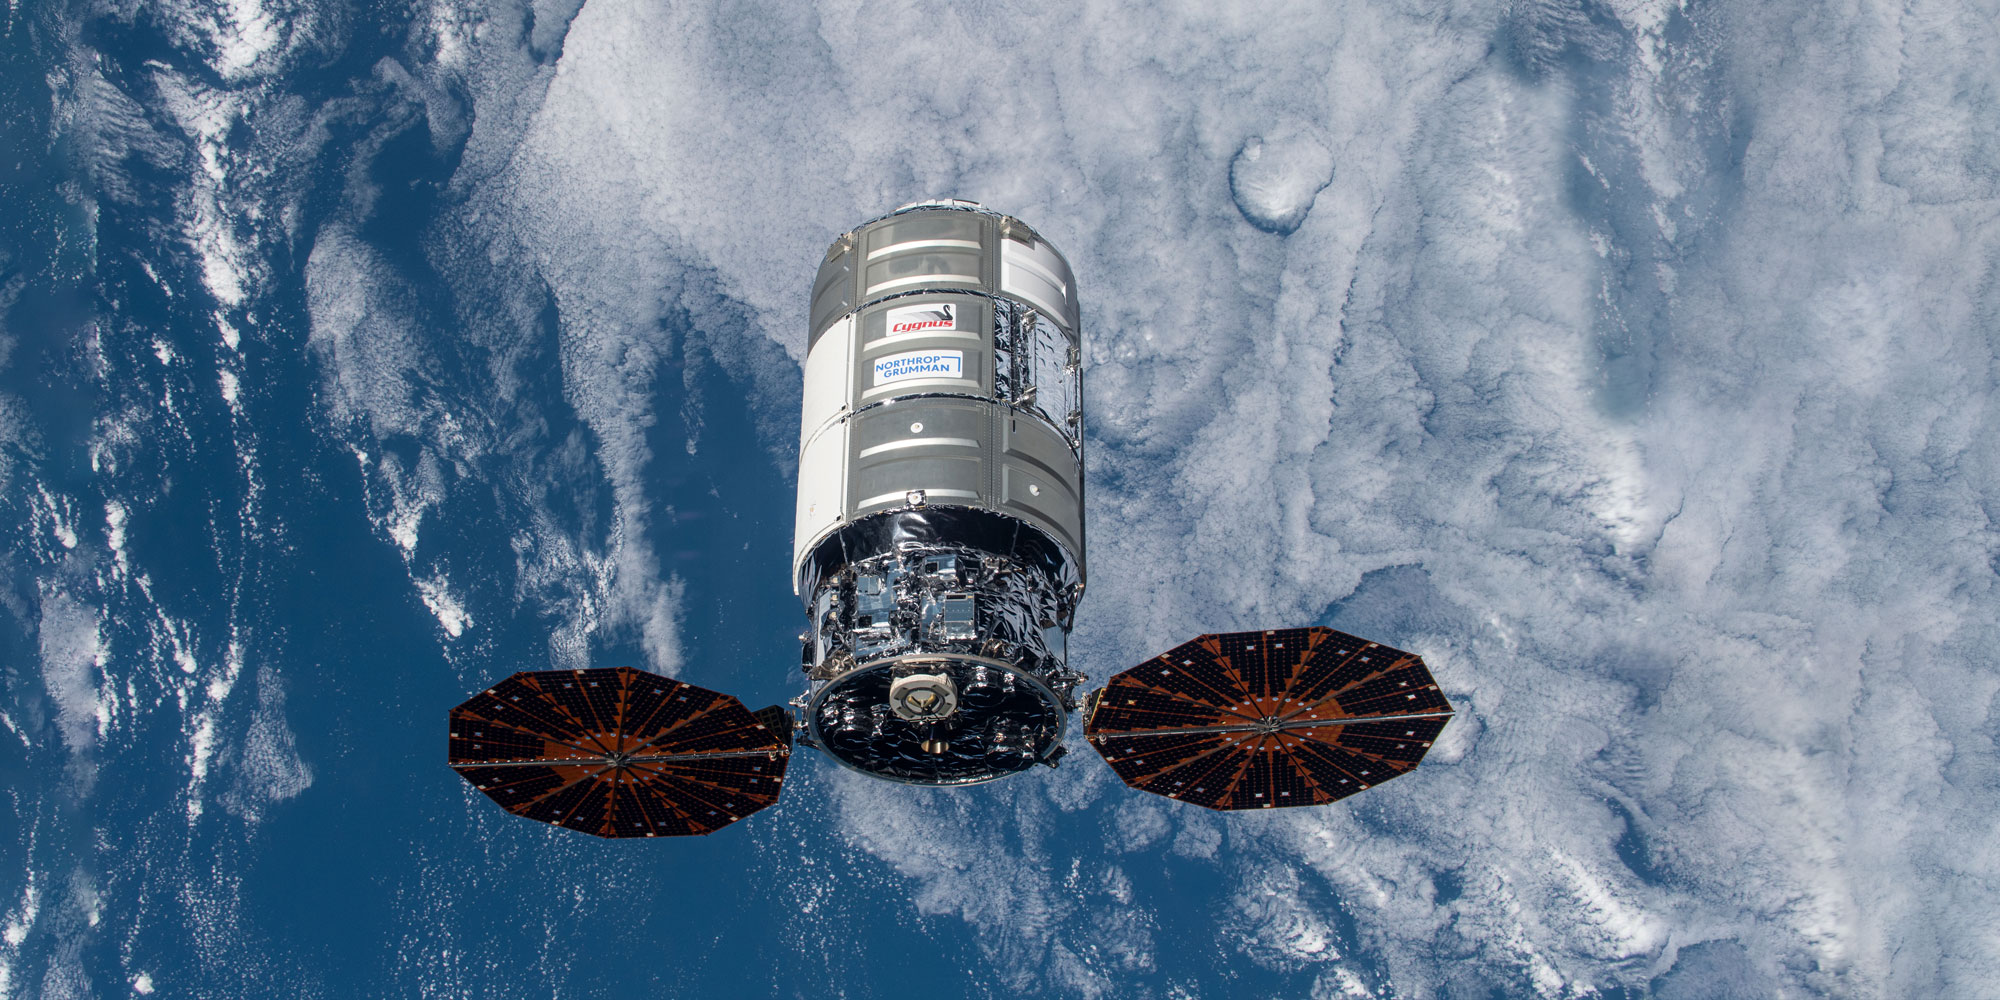 Cygnus spacecraft above earth clouds and ocean